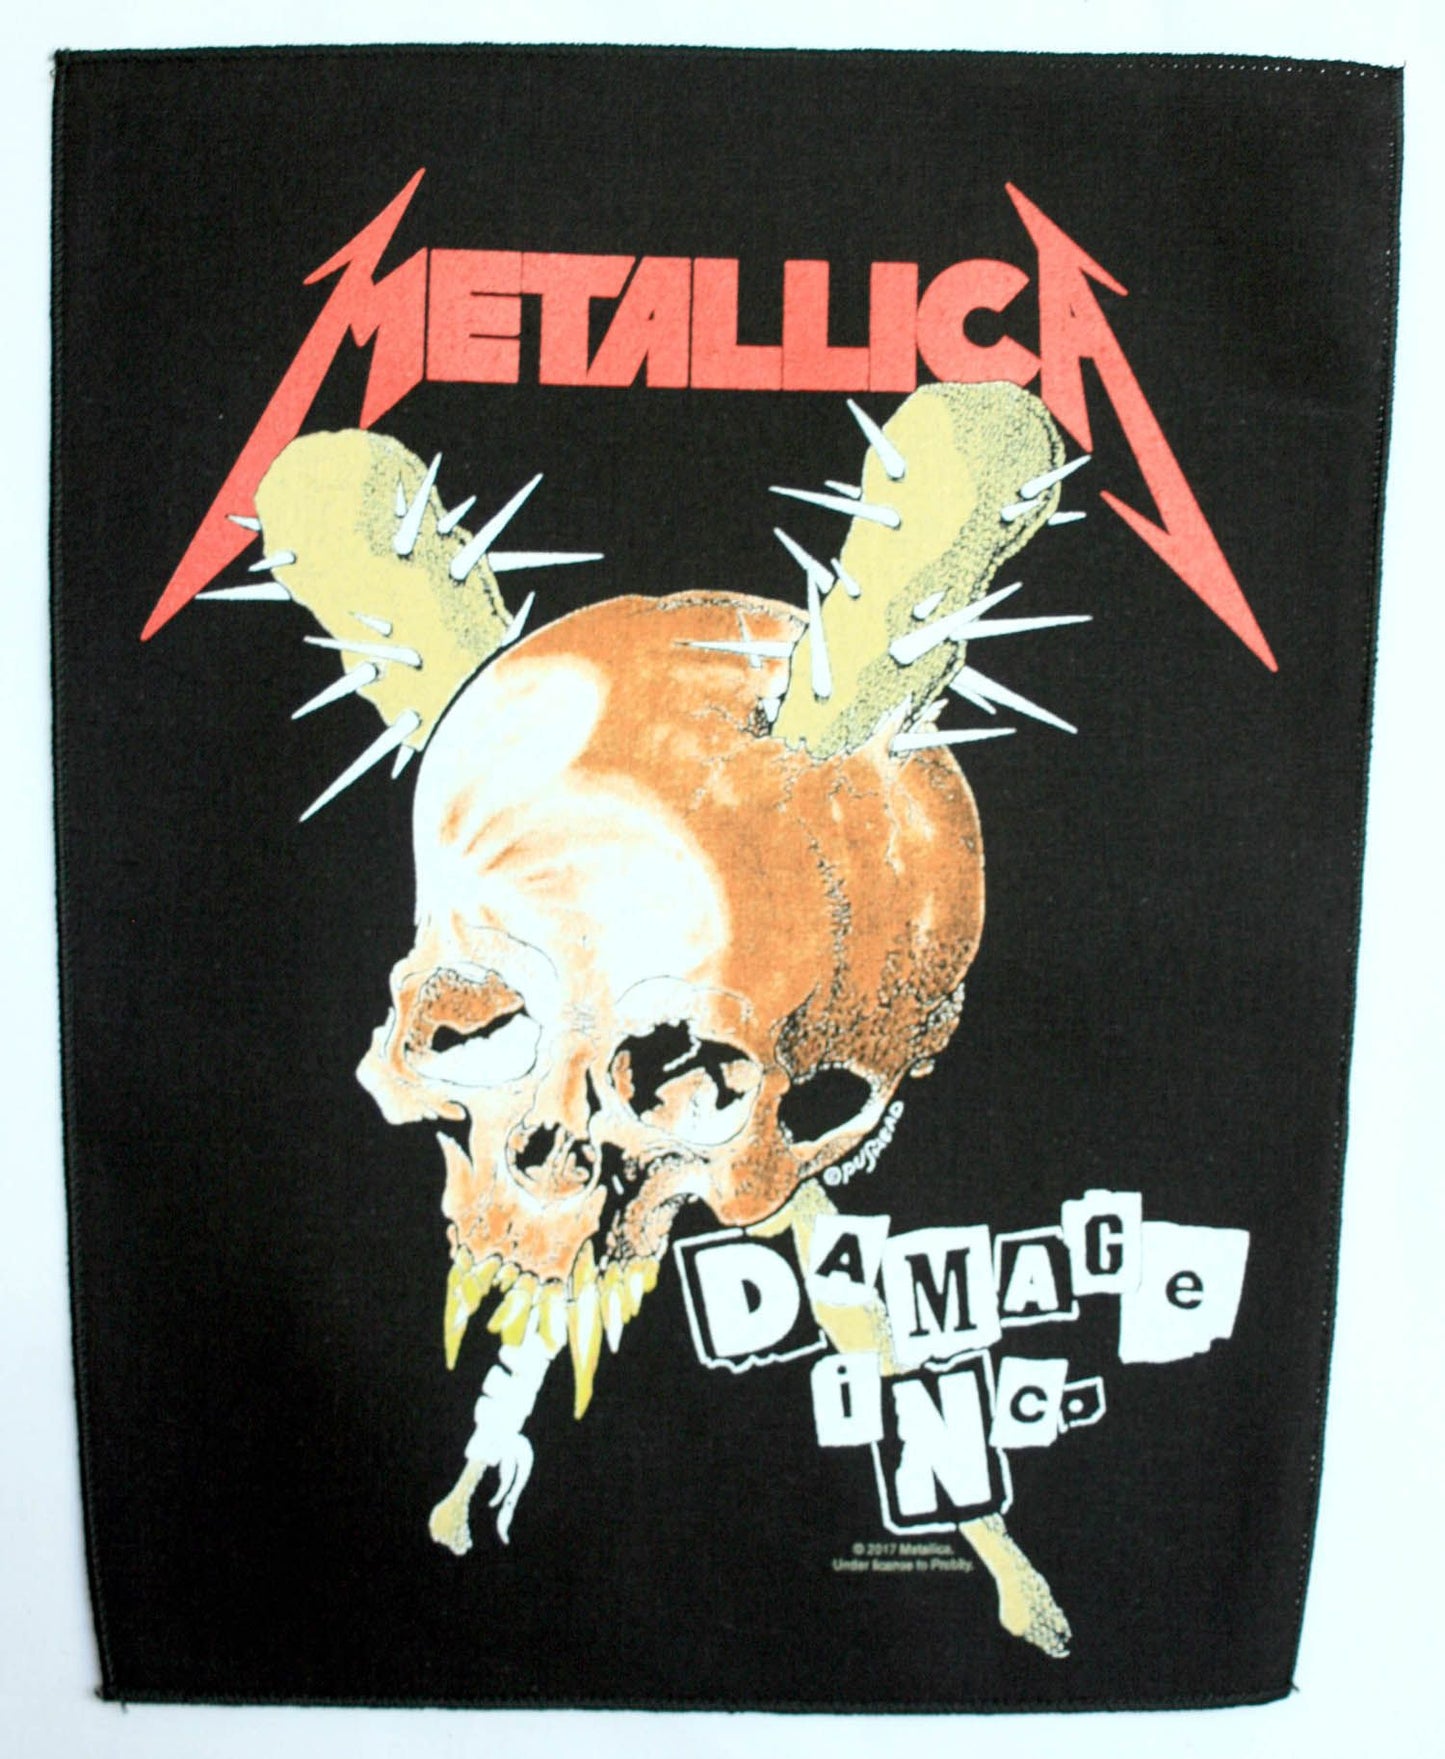 Damage Inc by Metallica, Back Patch